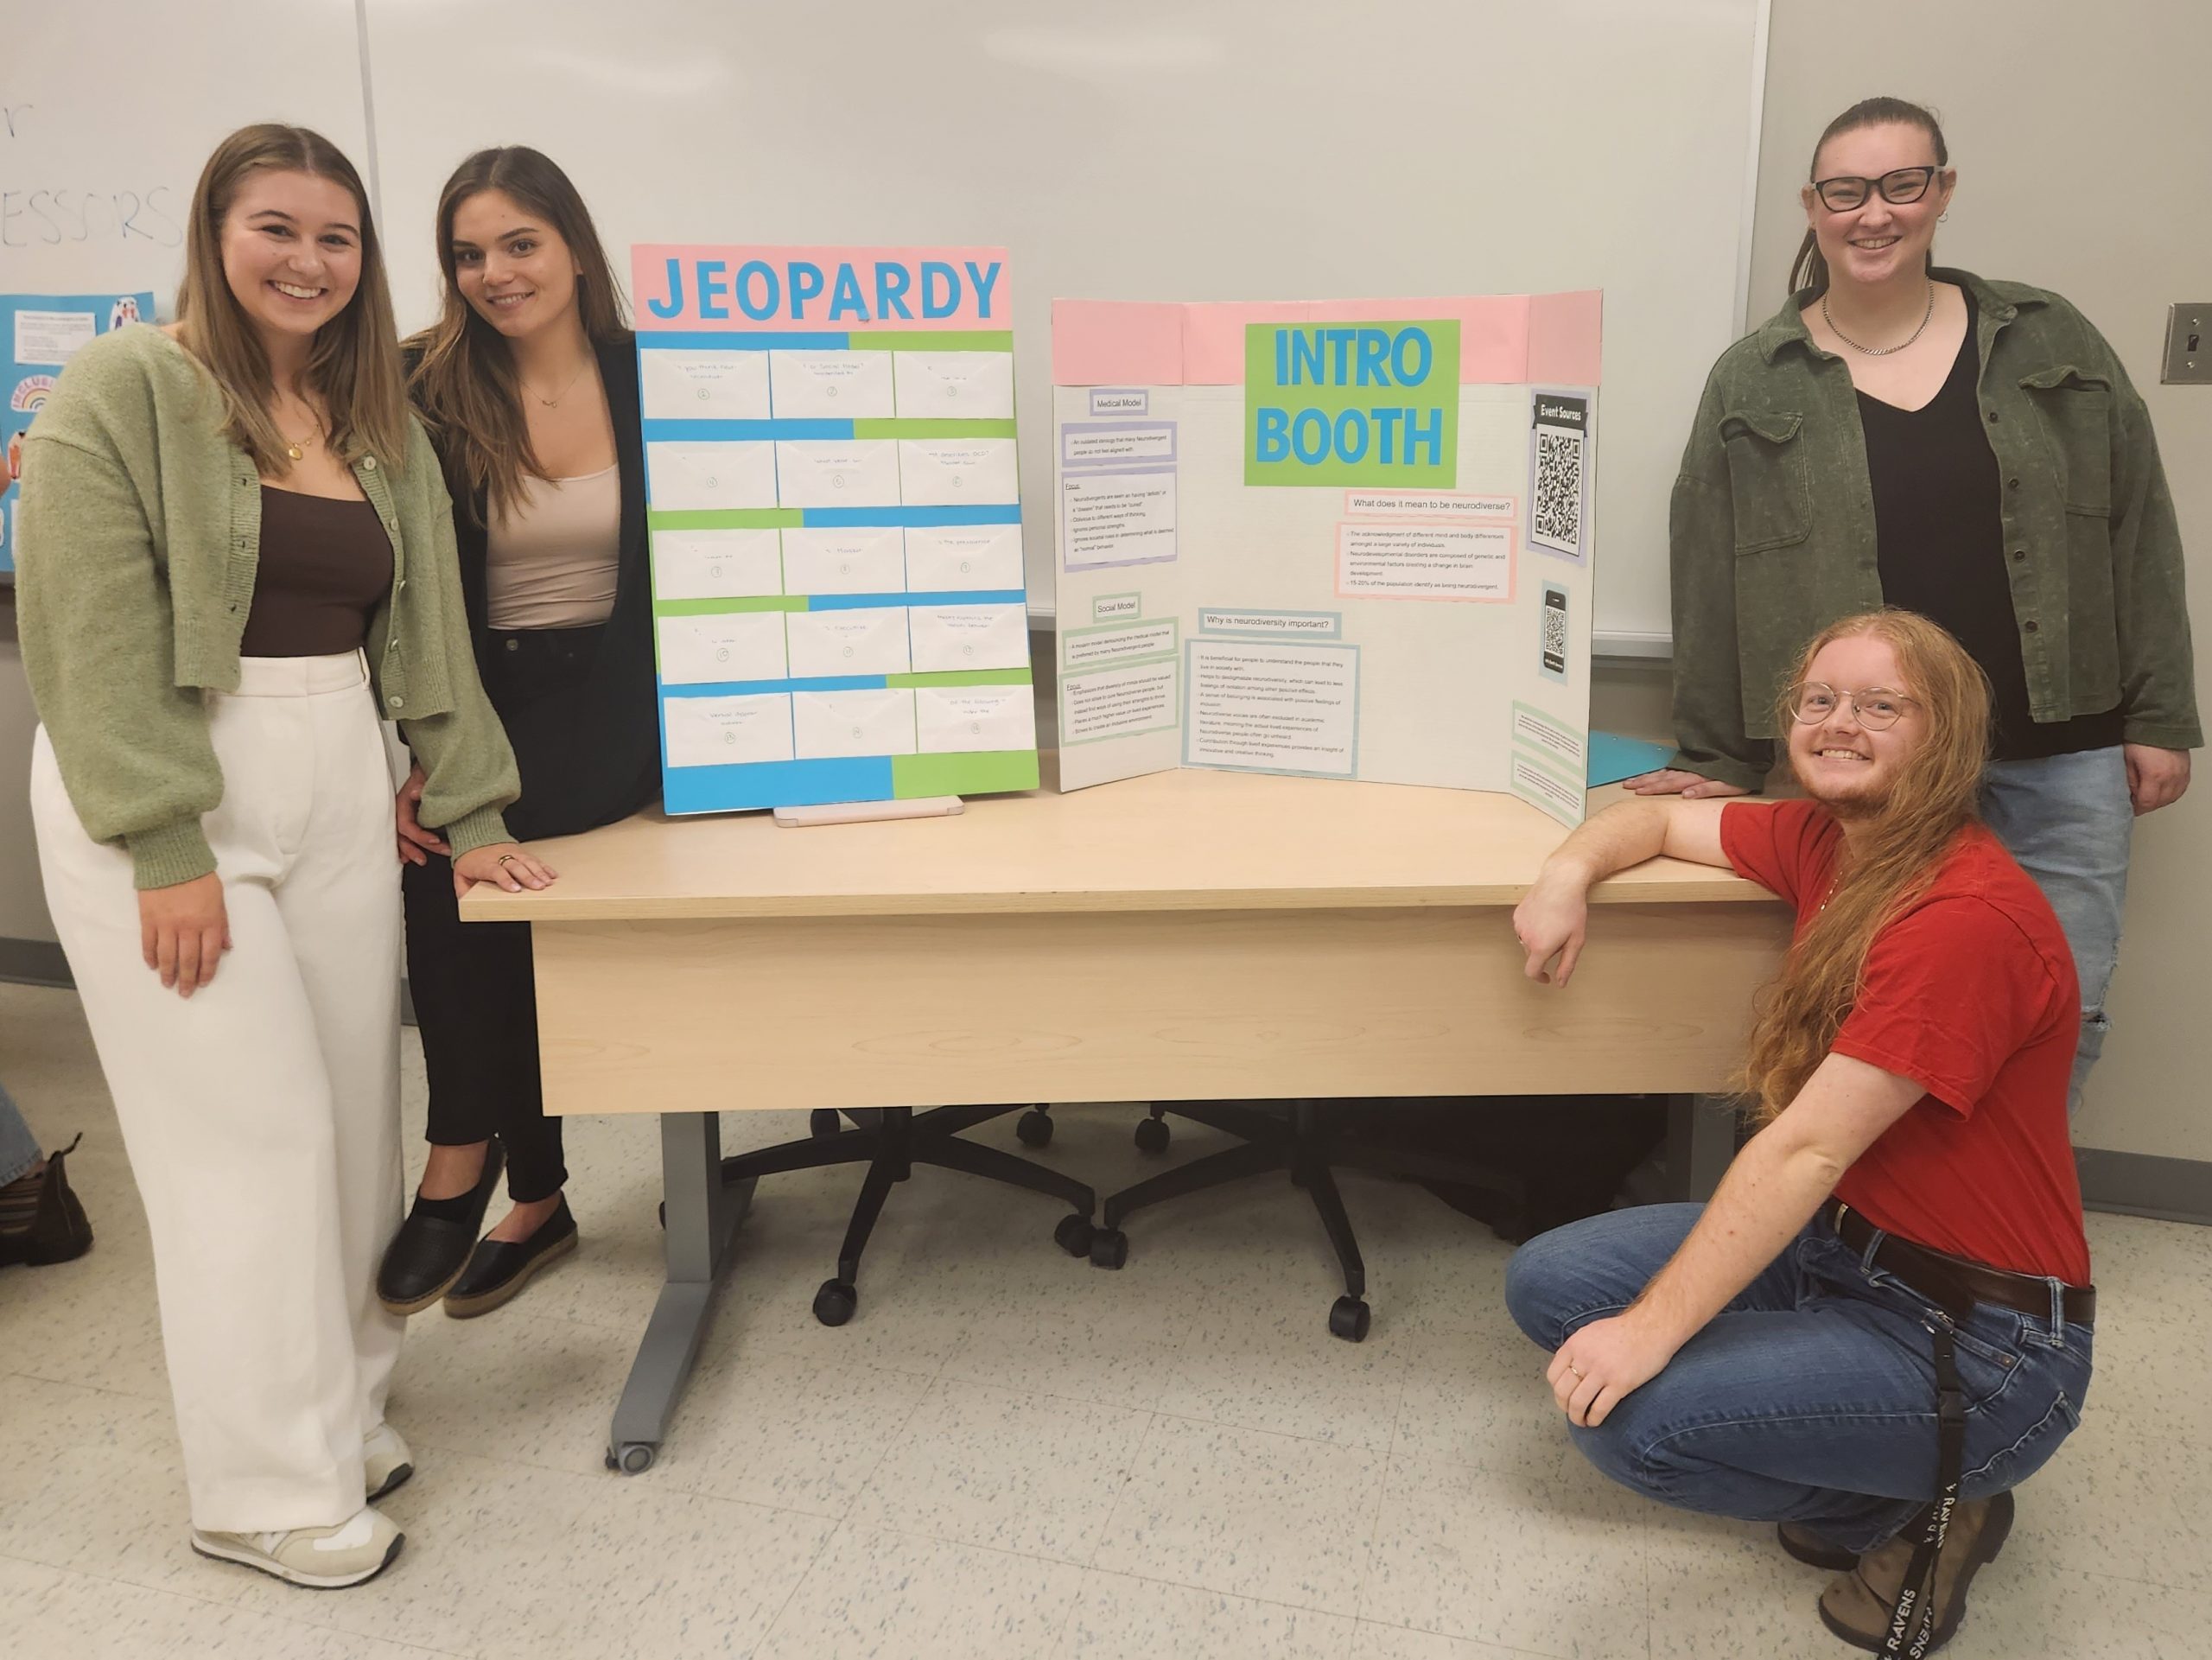 Introduction booth featuring students who hosted a game of Jeopardy